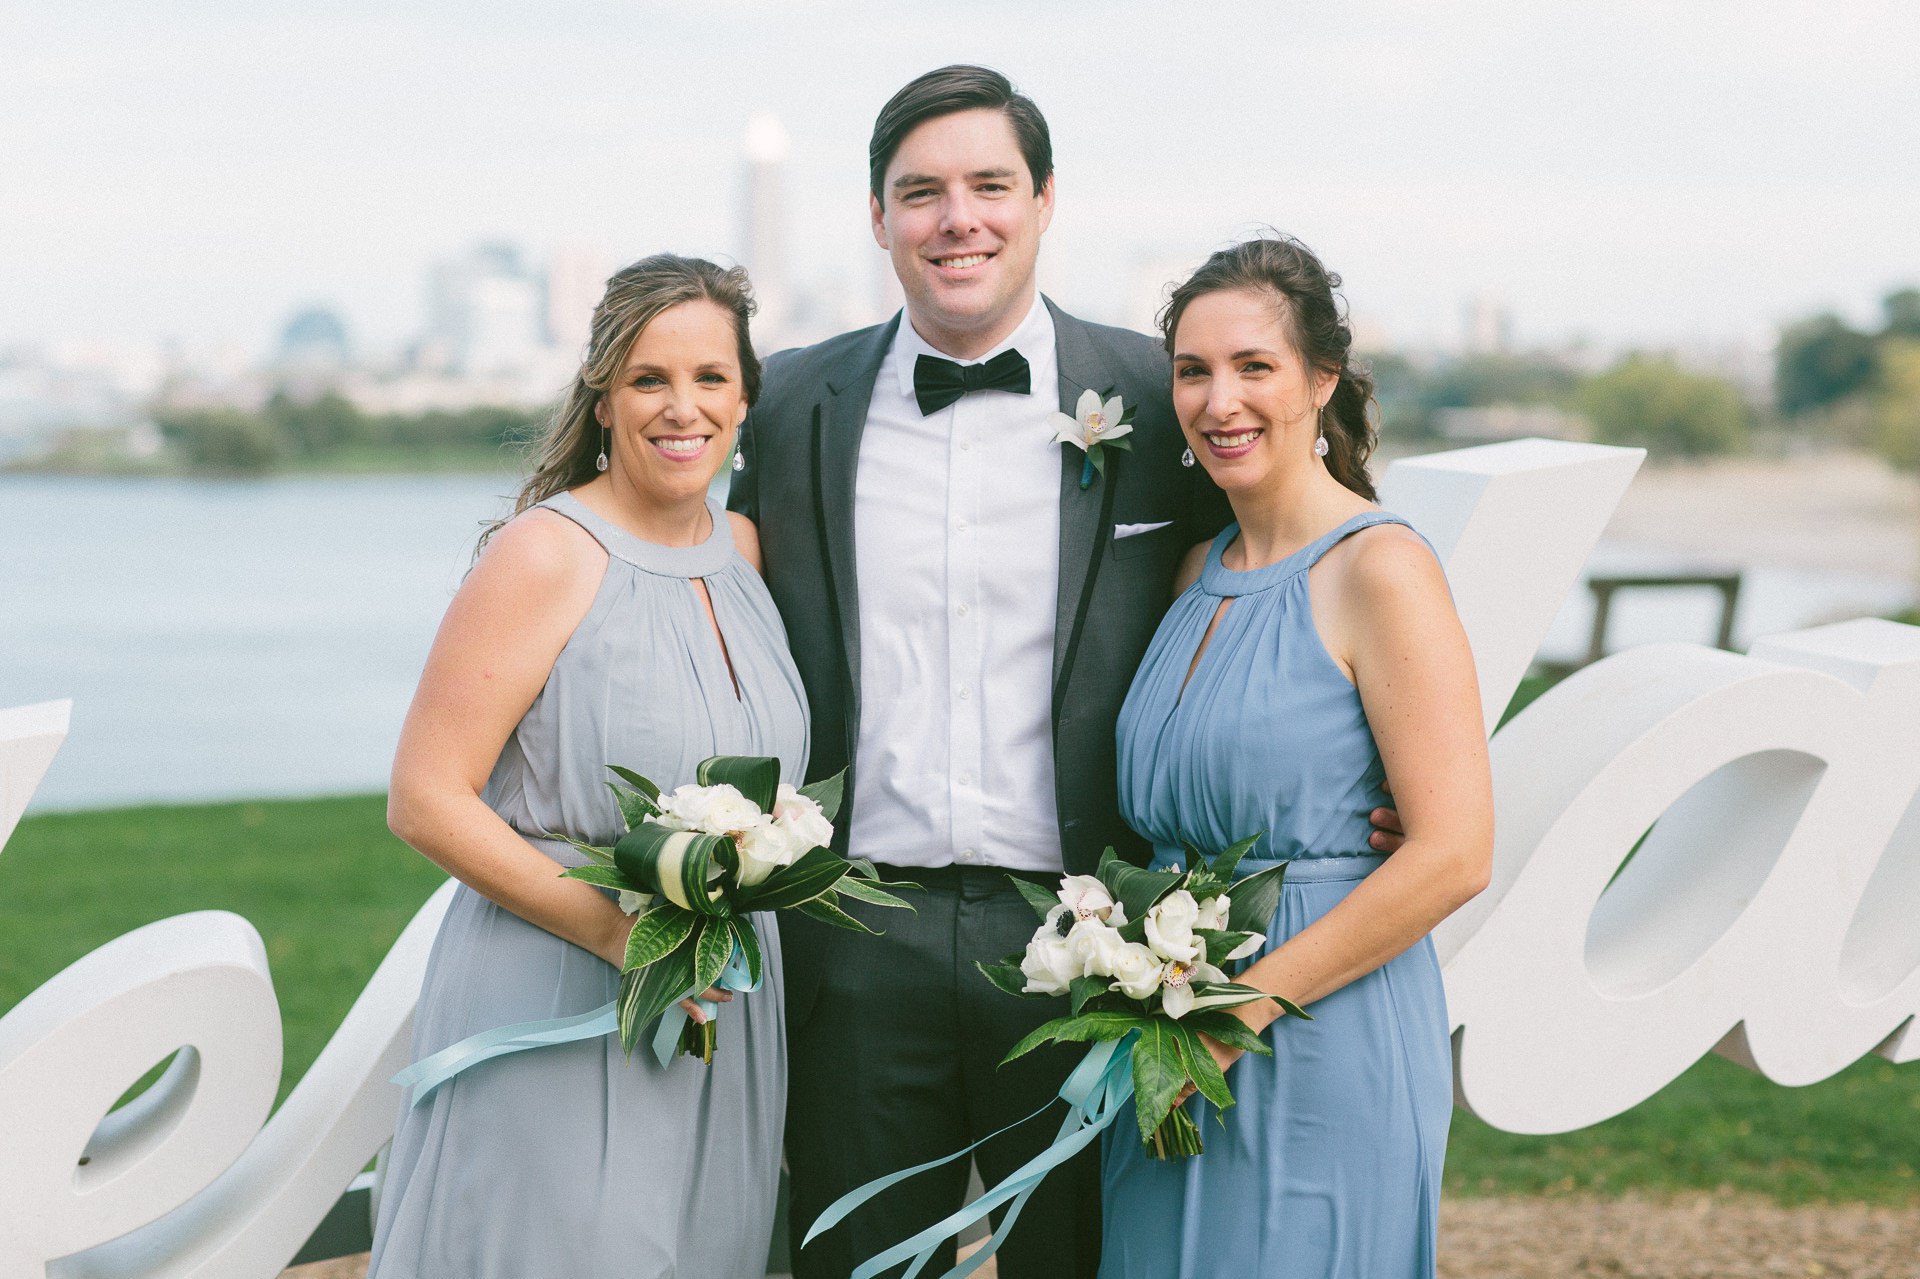 Wedding at Ernst and Young Rooftop in Downtown Cleveland 1 44.jpg